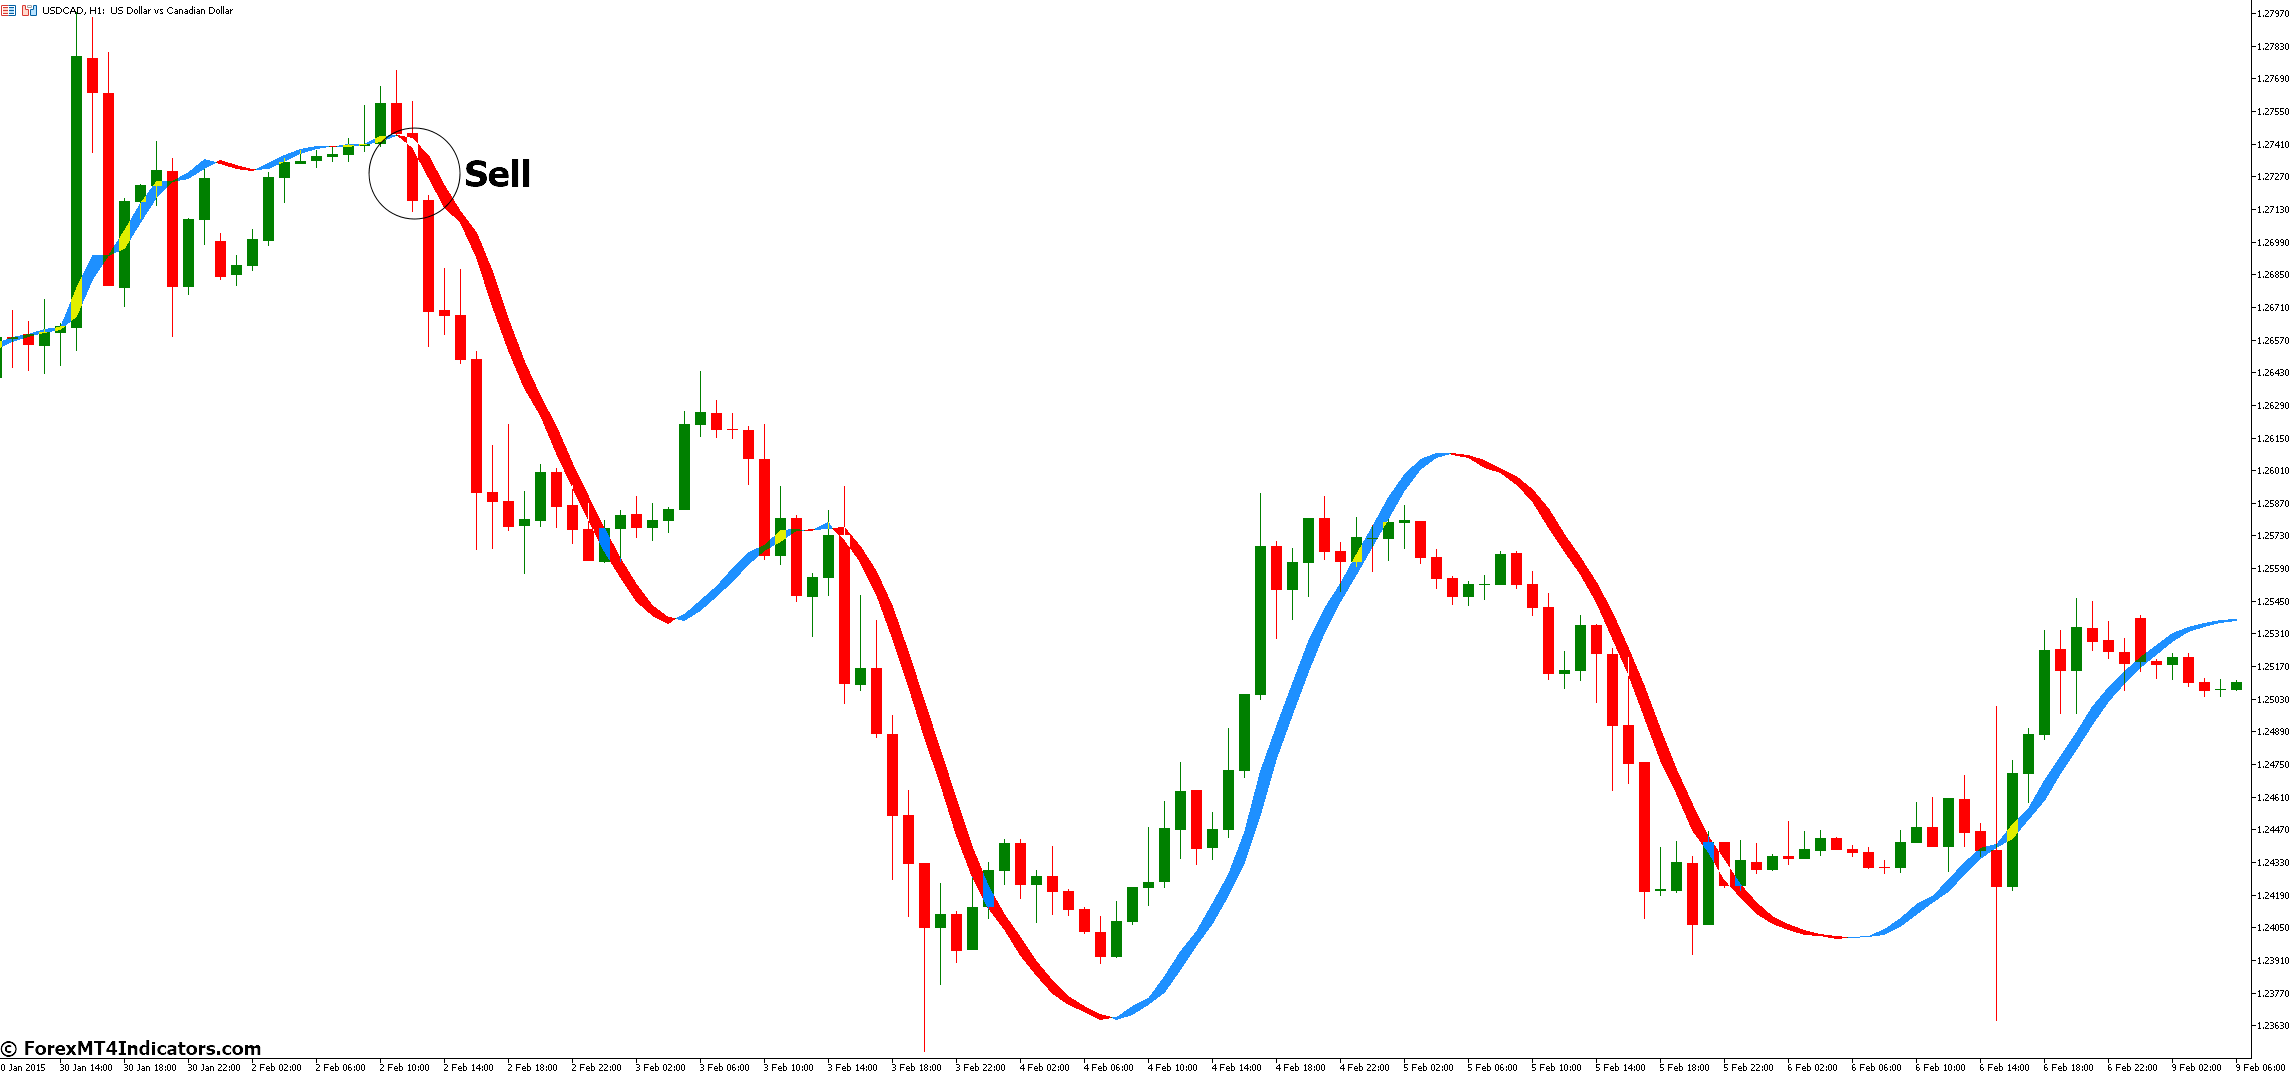 How to Trade with Trigger Line MT5 Indicator - Sell Entry